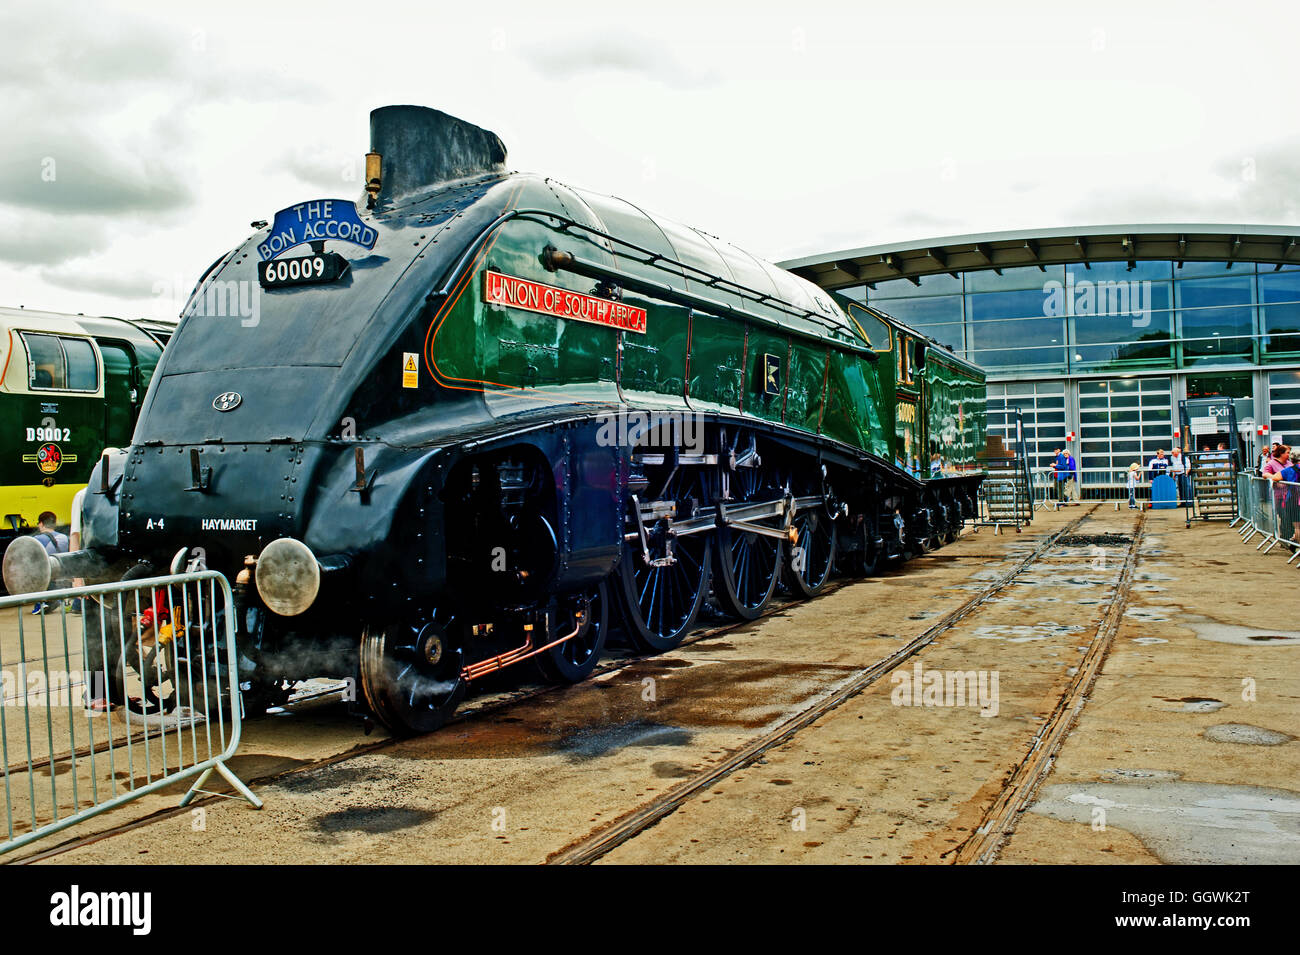 A4 Pacific No 60009 Union of South Africa at Locomotion Railway Museum at Shildon County Durham Stock Photo